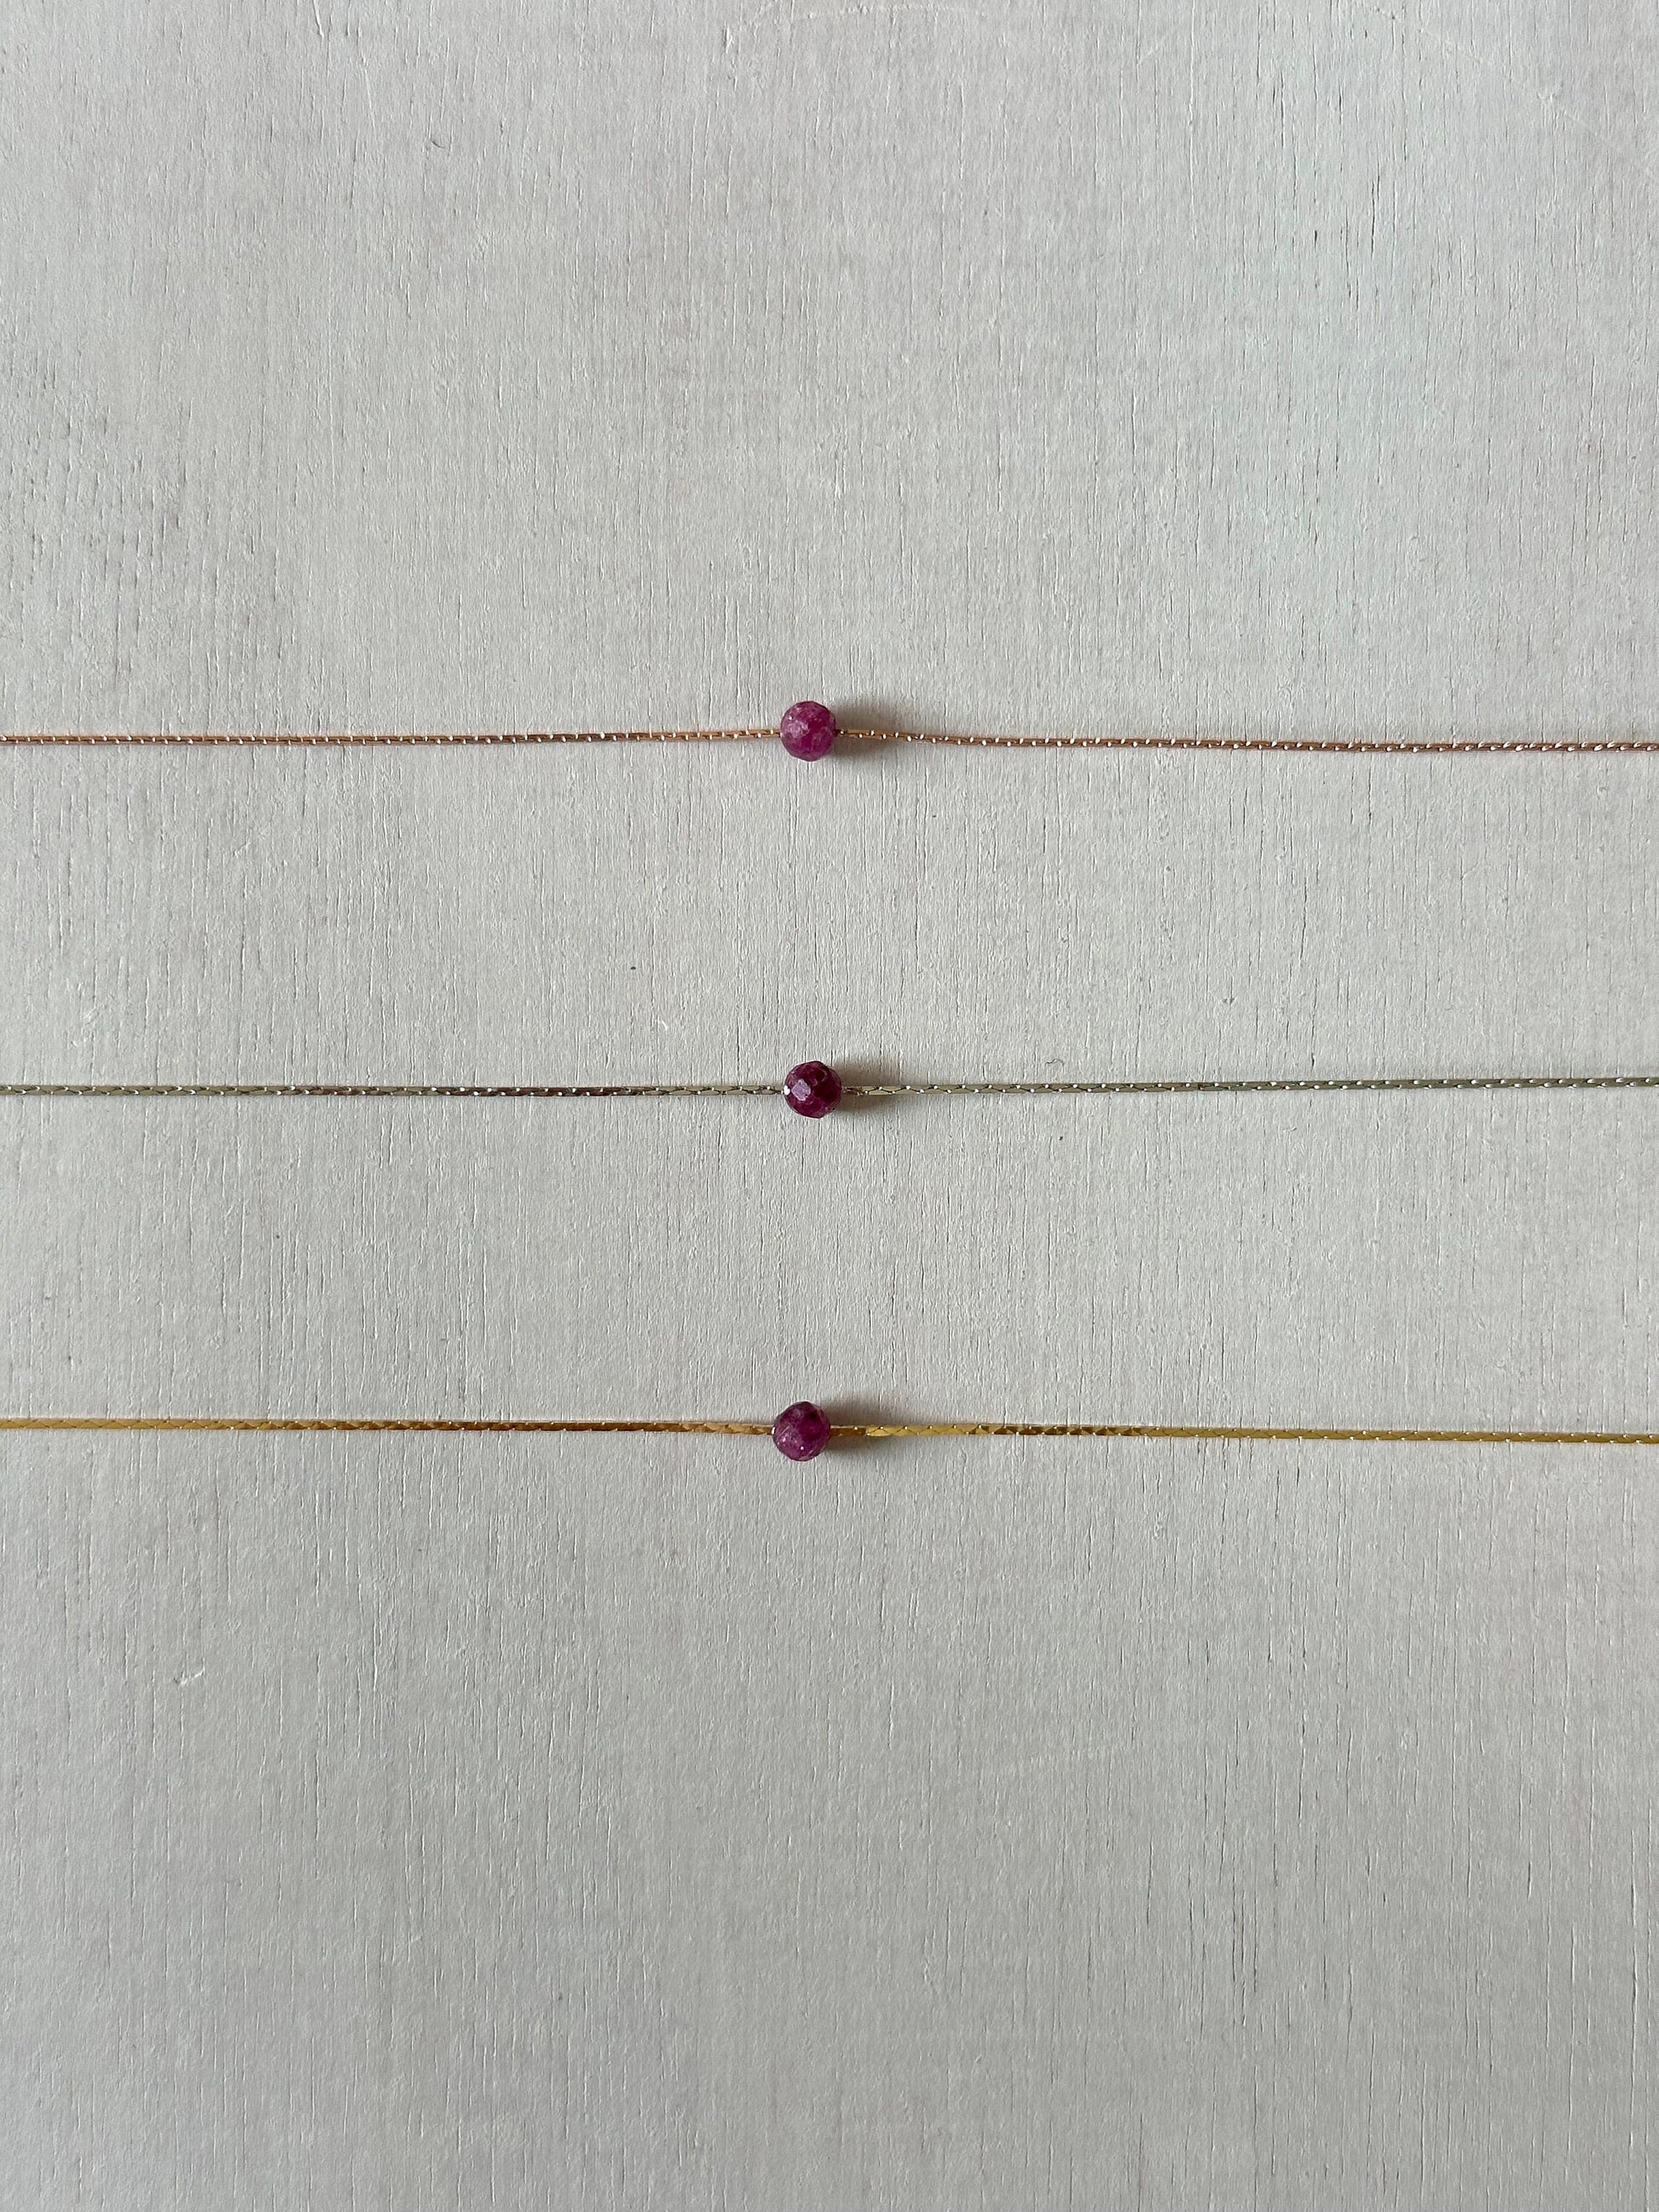 Ruby Necklace | Rose Gold | Gold | Silver | Dainty Necklace | Layering Necklace | Gemstone Necklace | Bead Necklace